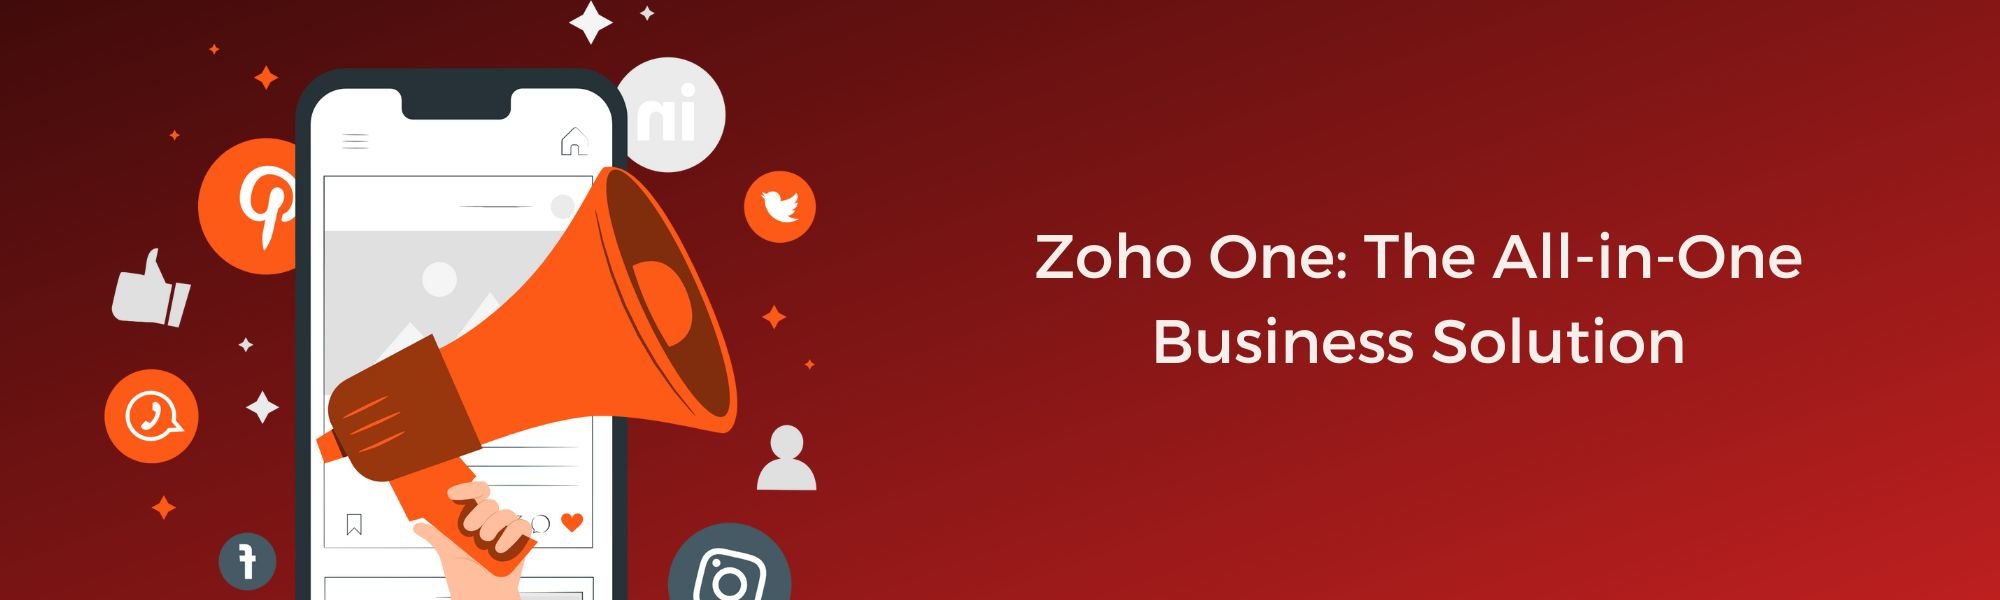 Zoho One: The All-in-One Business Solution